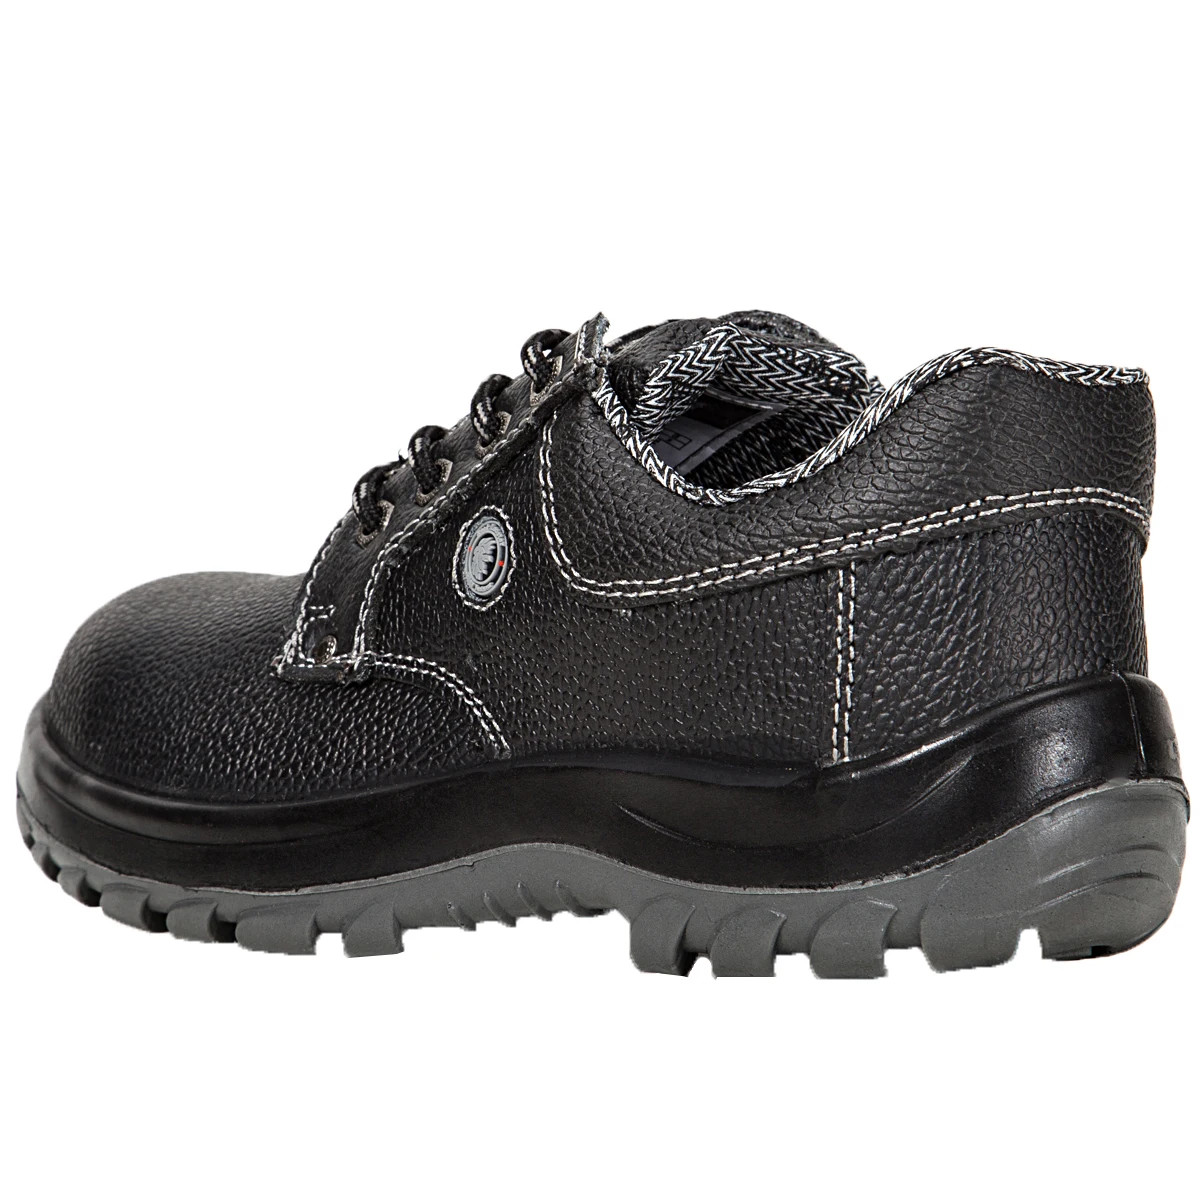 Esd black Four Seasons Waterproof oil resistant low cut safety shoes